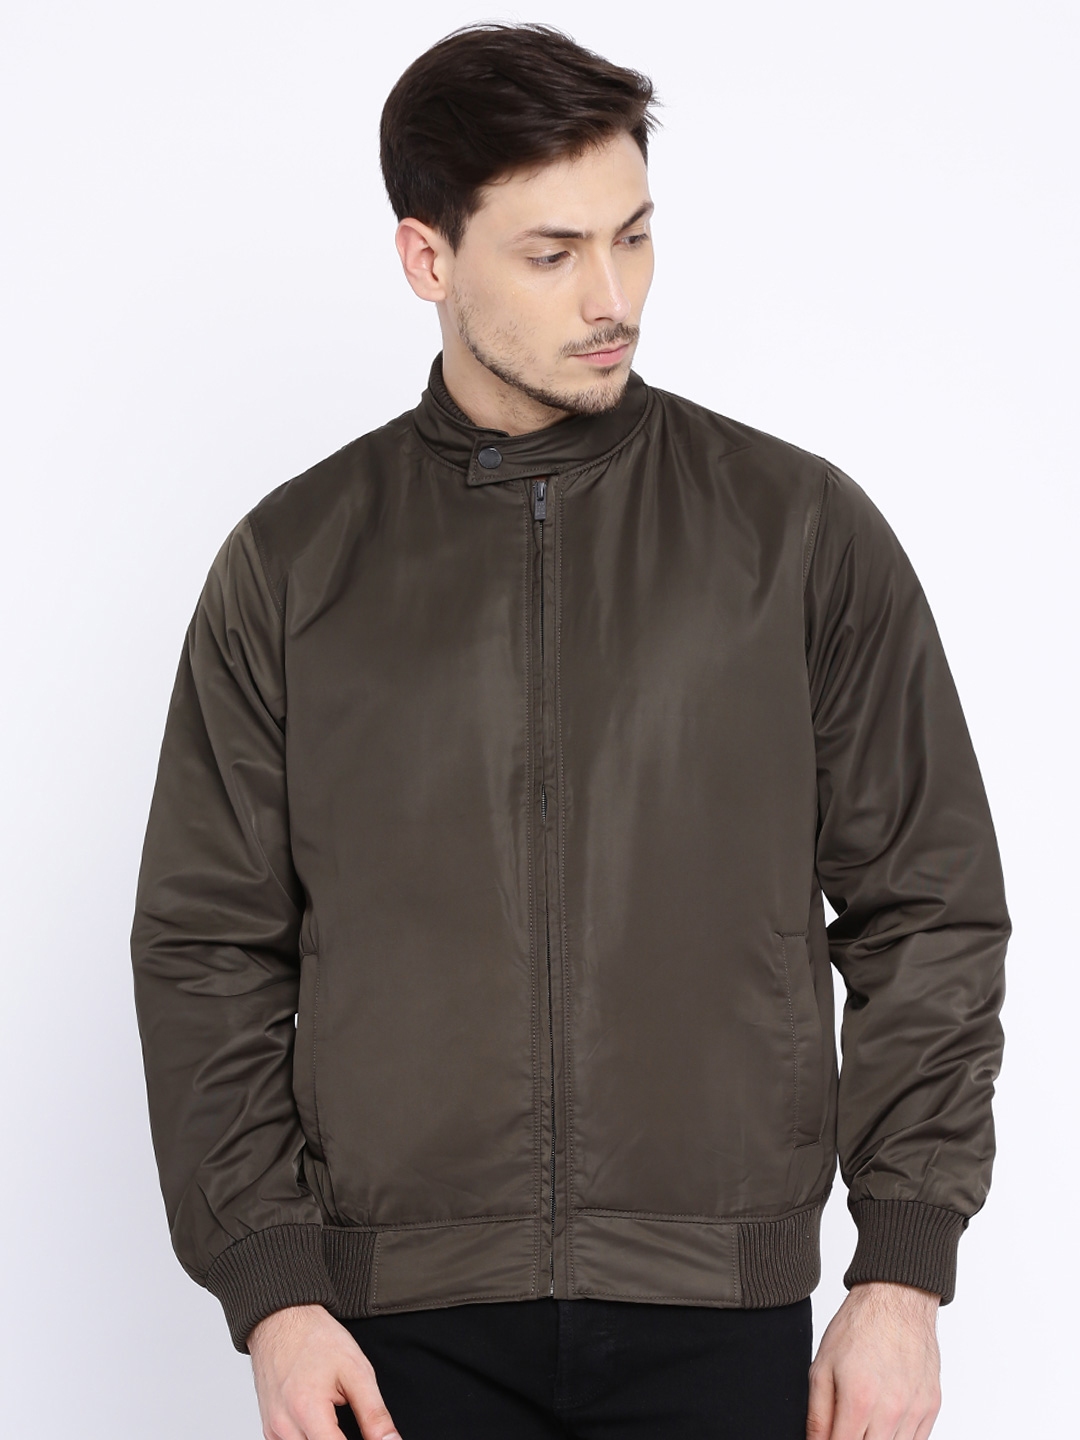 Buy Pepe Jeans Olive Green Jacket - Jackets for Men 1633019 | Myntra